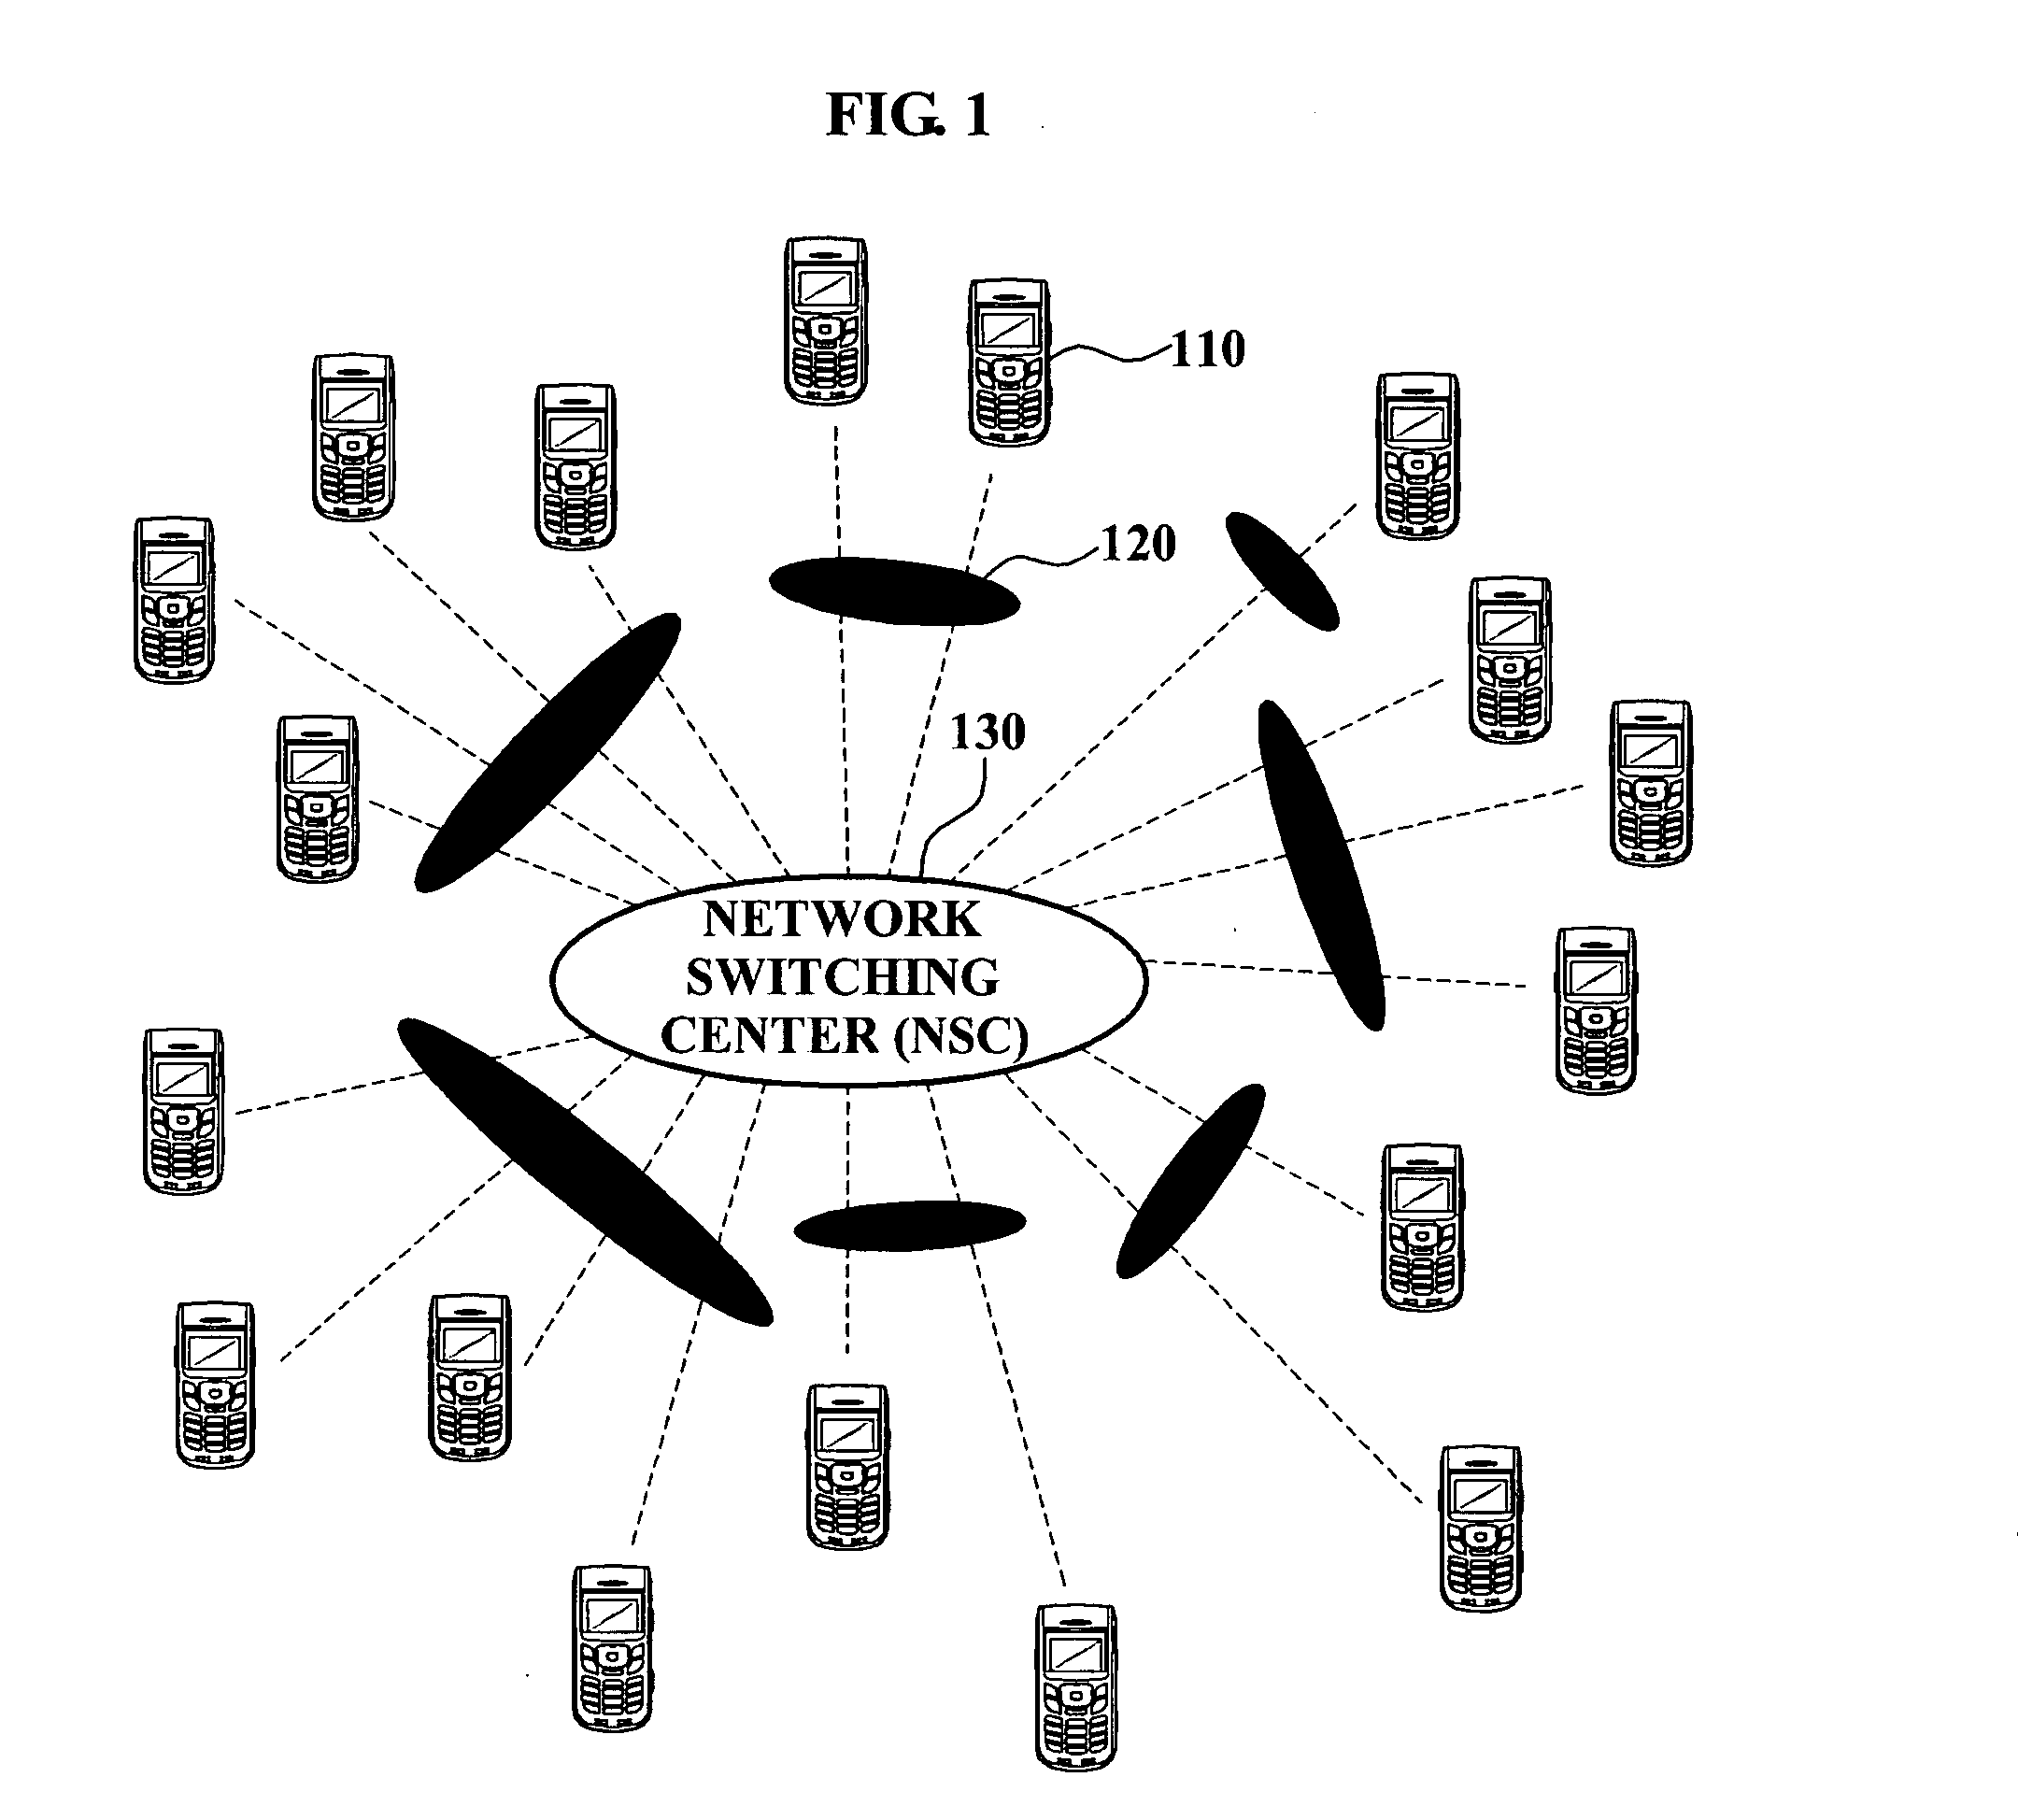 Method of security management for wireless mobile device and apparatus for security management using the method